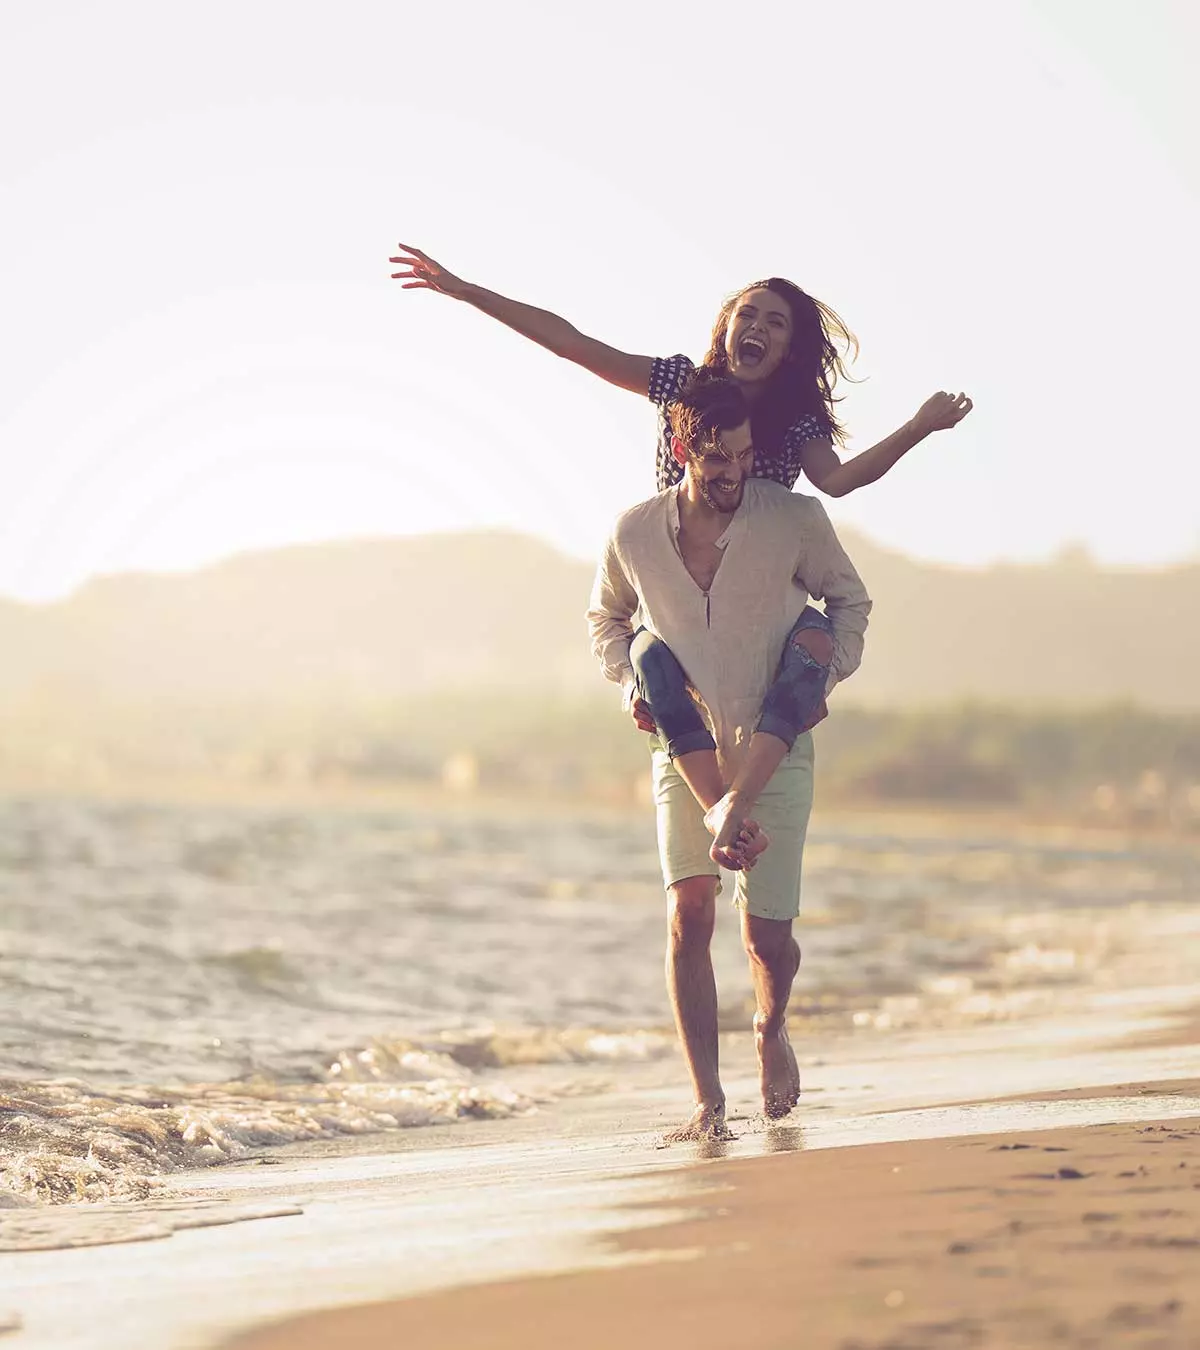 How To Beat The '7-Year Itch' In Your Relationship